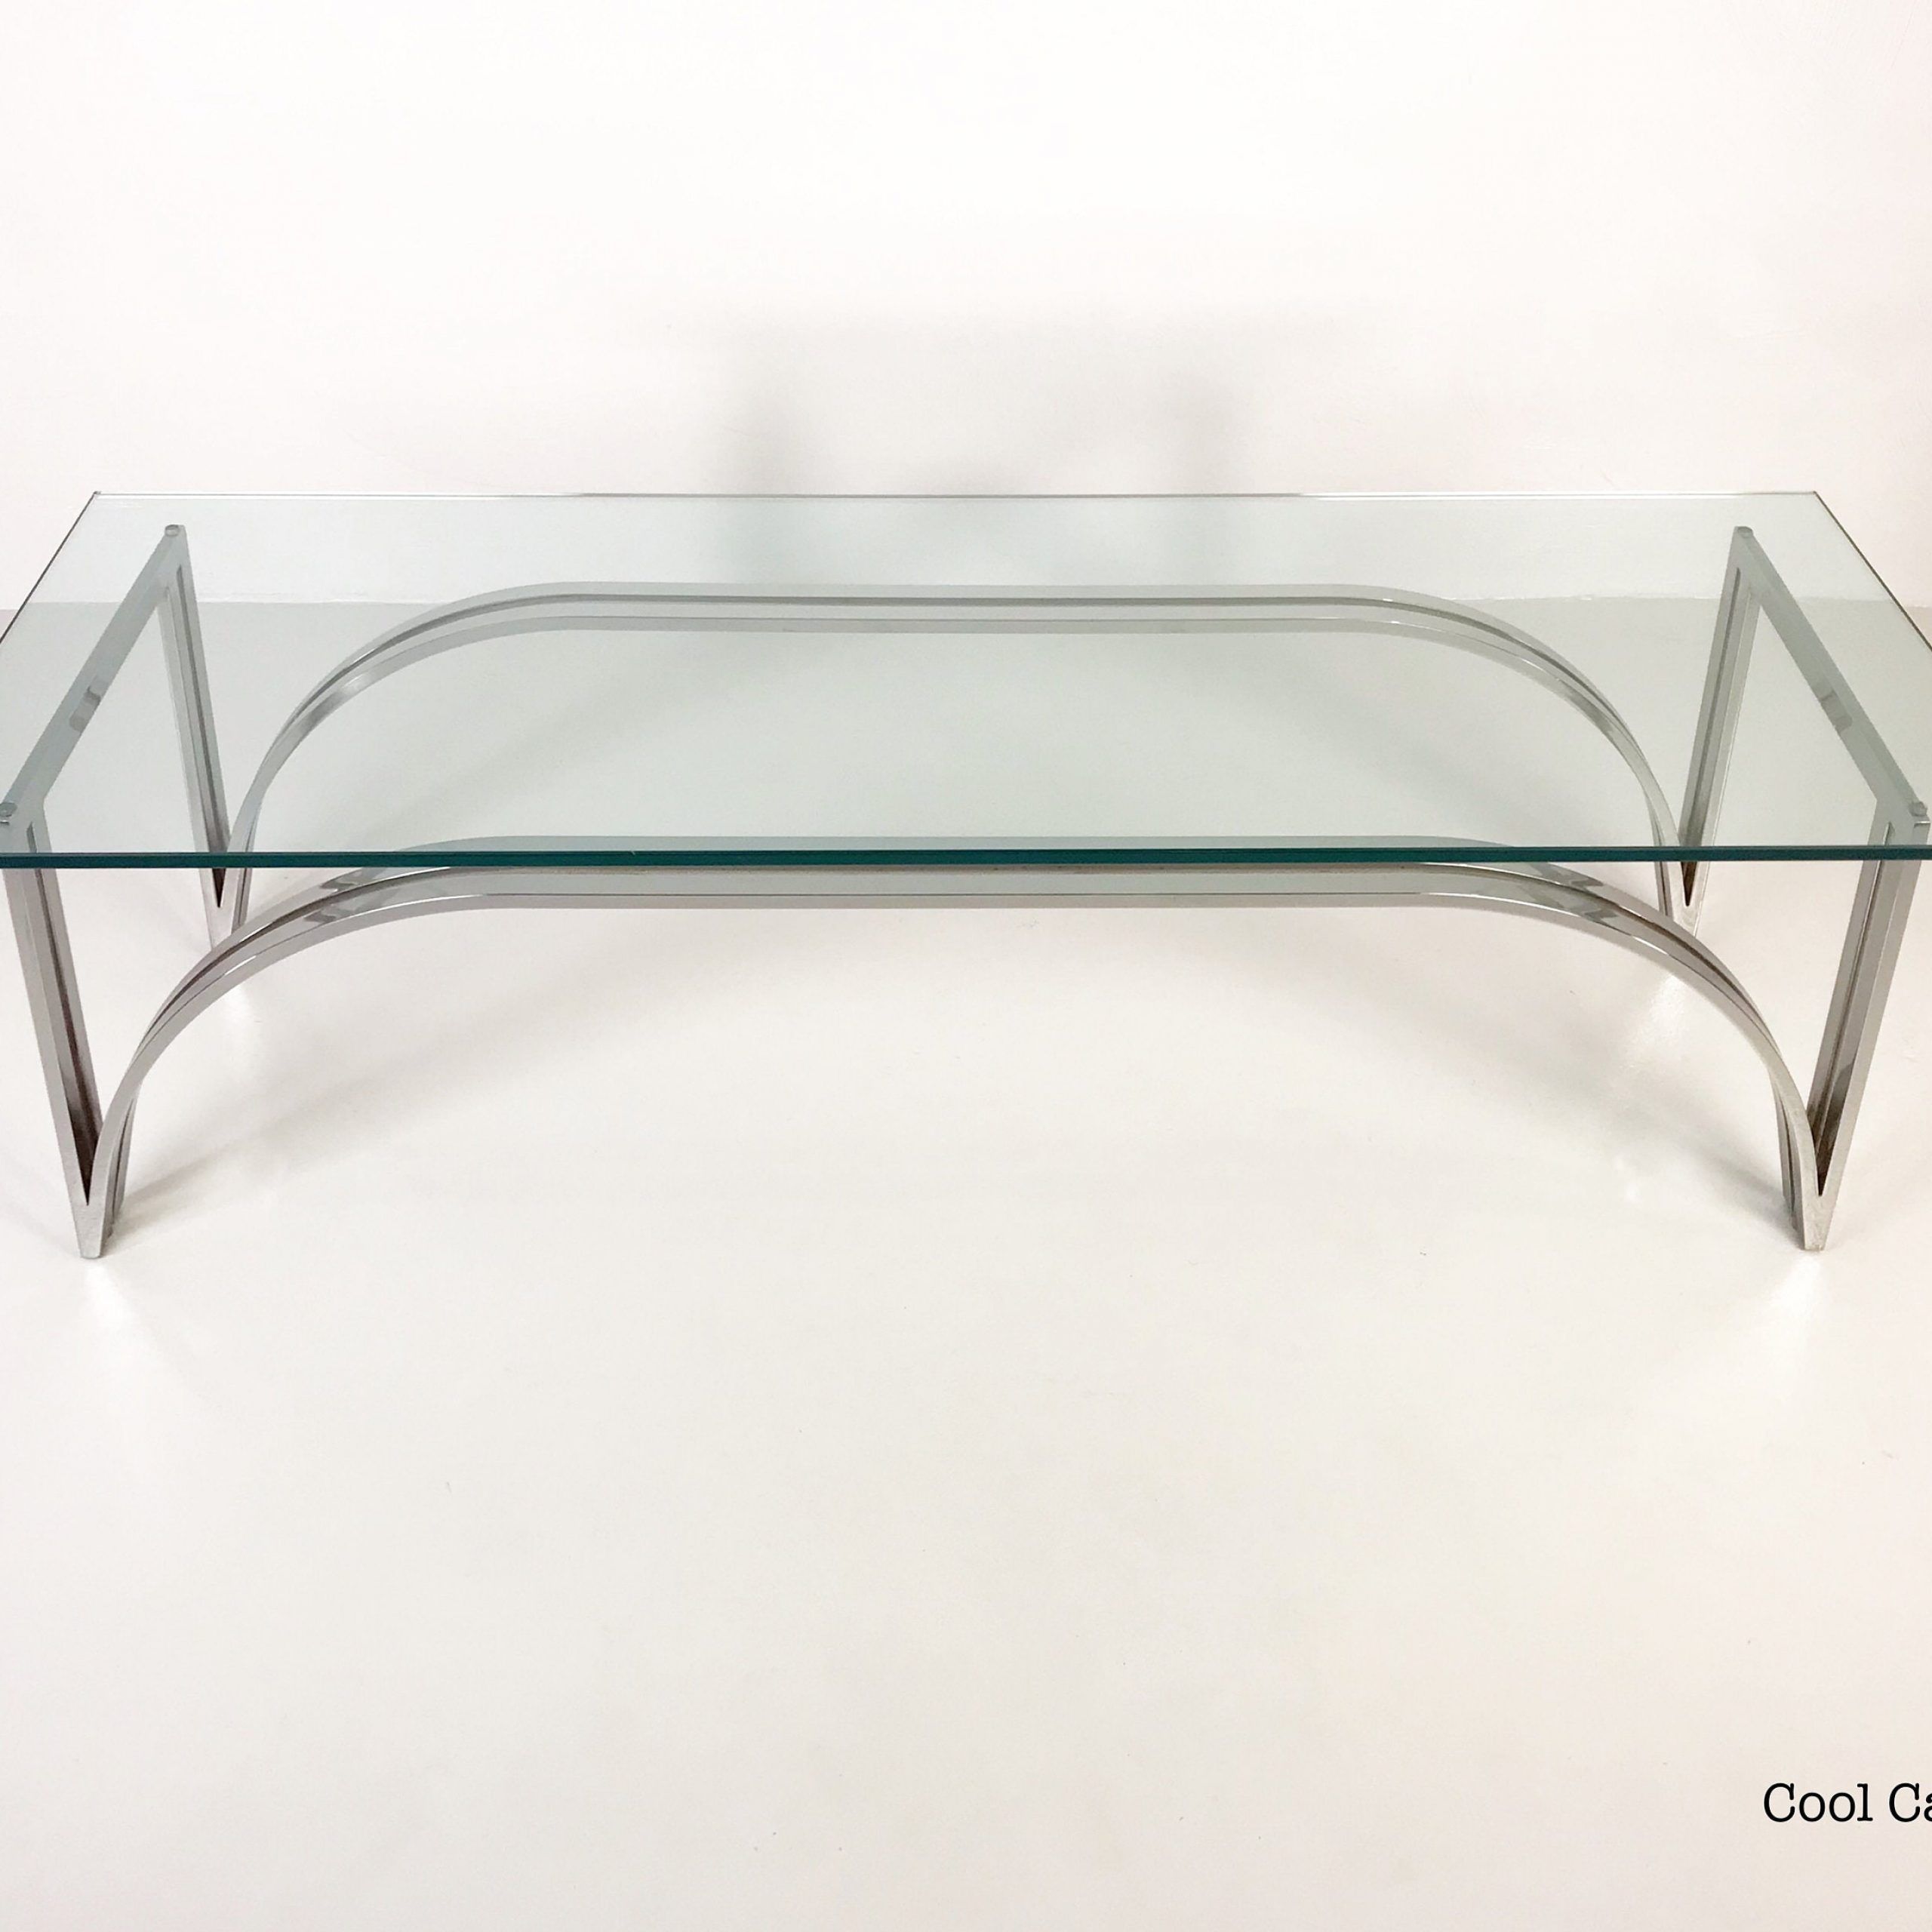 Modern Rectangular Chrome Glass Top Coffee Table, Circa Regarding Chrome And Glass Rectangular Coffee Tables (View 3 of 15)